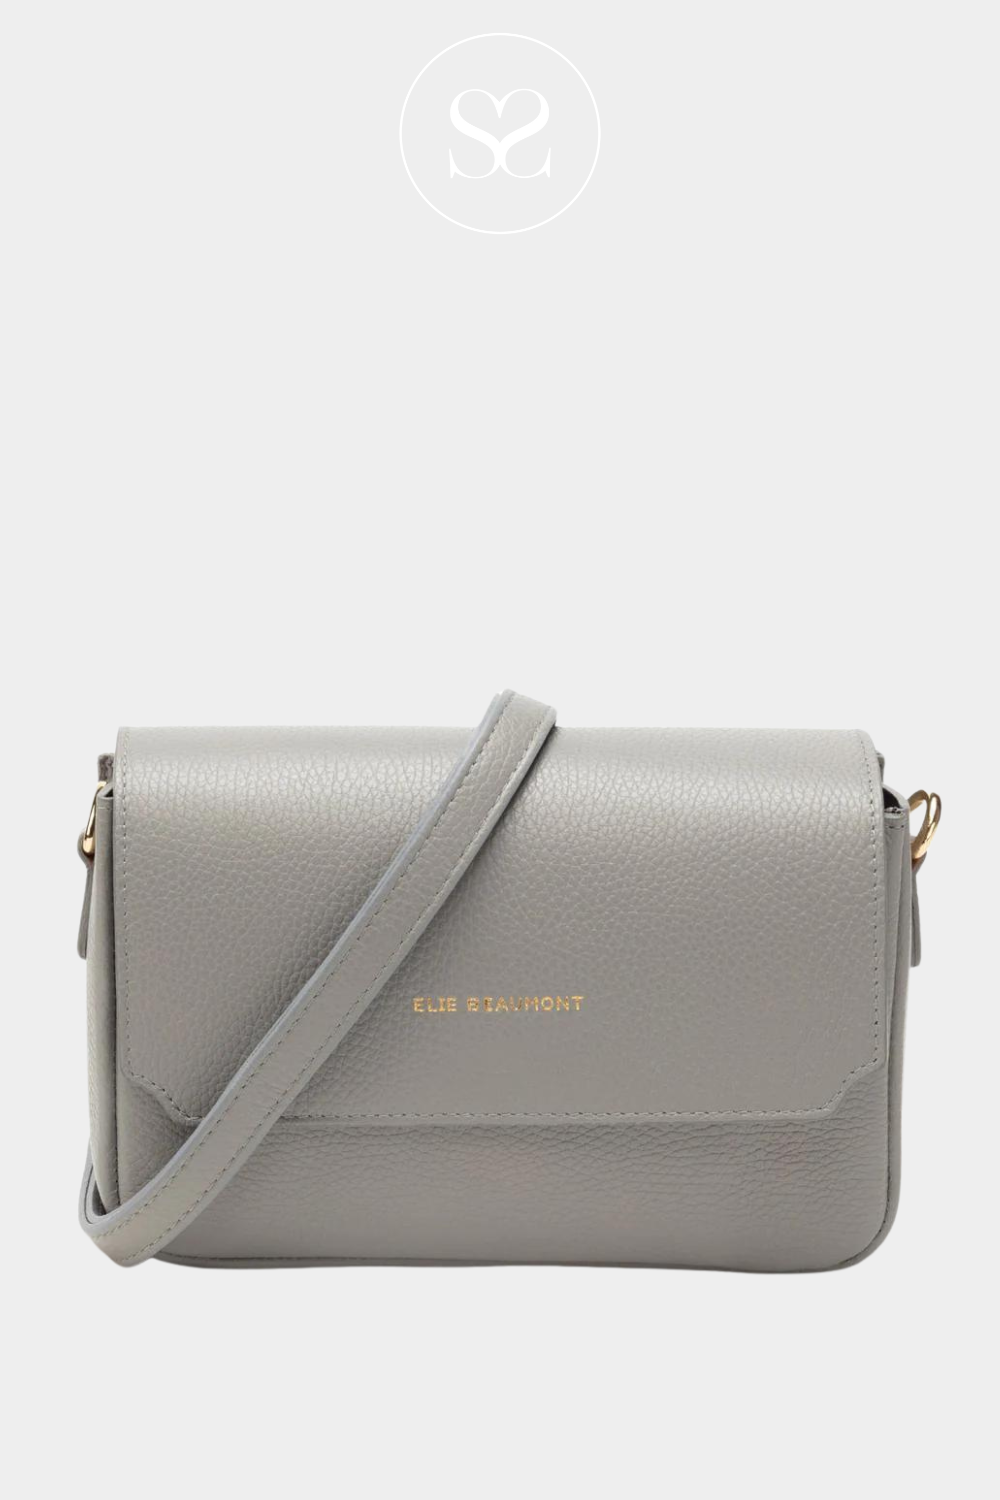 elie beaumont grey leather fold over crossbody bag